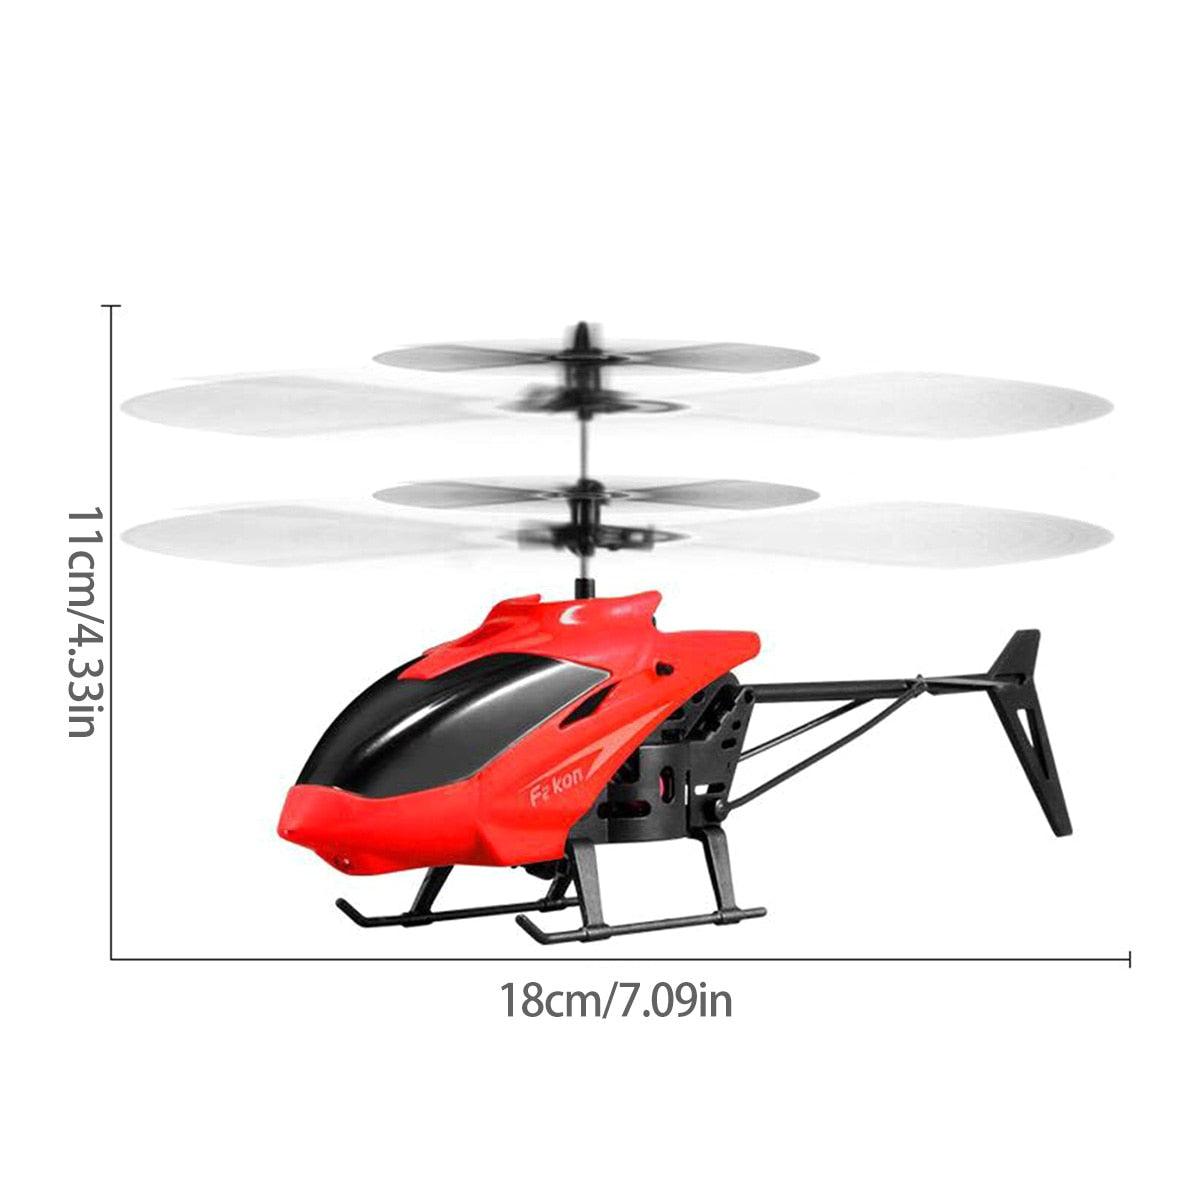 CY-38 Rc Helicopter - RC Toy Aircraft Induction Hovering USB Charge Control Drone Kid Plane Toys Indoor Flight Toys - RCDrone